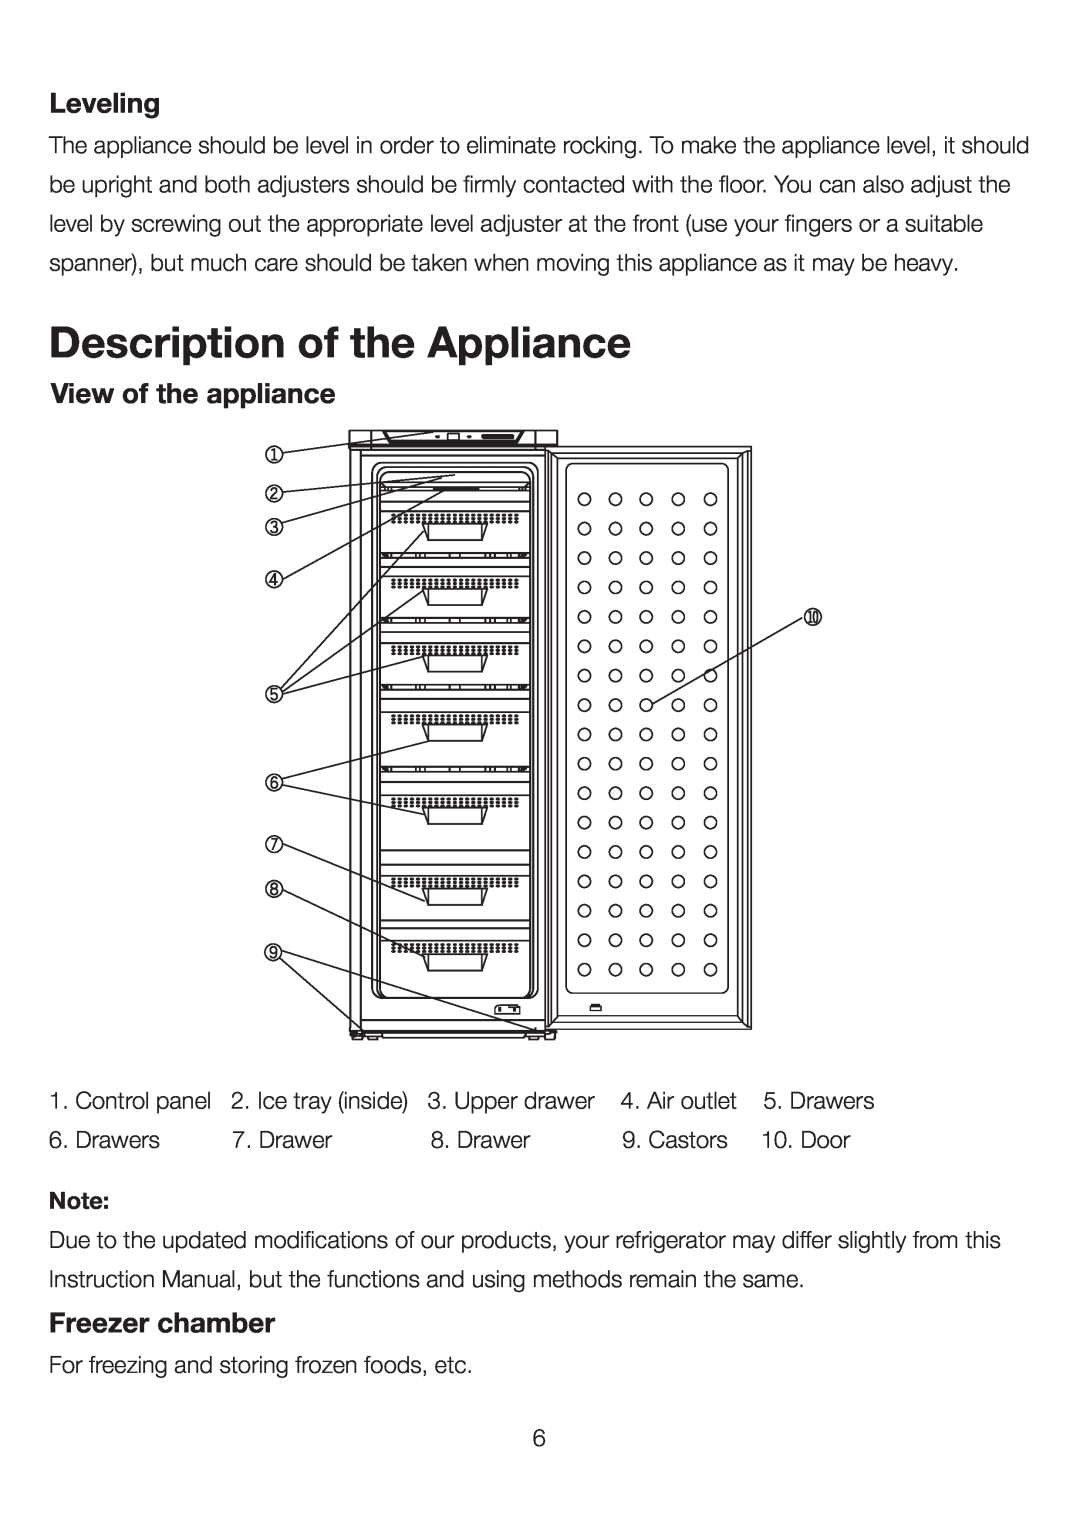 Ariston UP 350 FI (FE) manual Description of the Appliance, Leveling, View of the appliance, Freezer chamber 